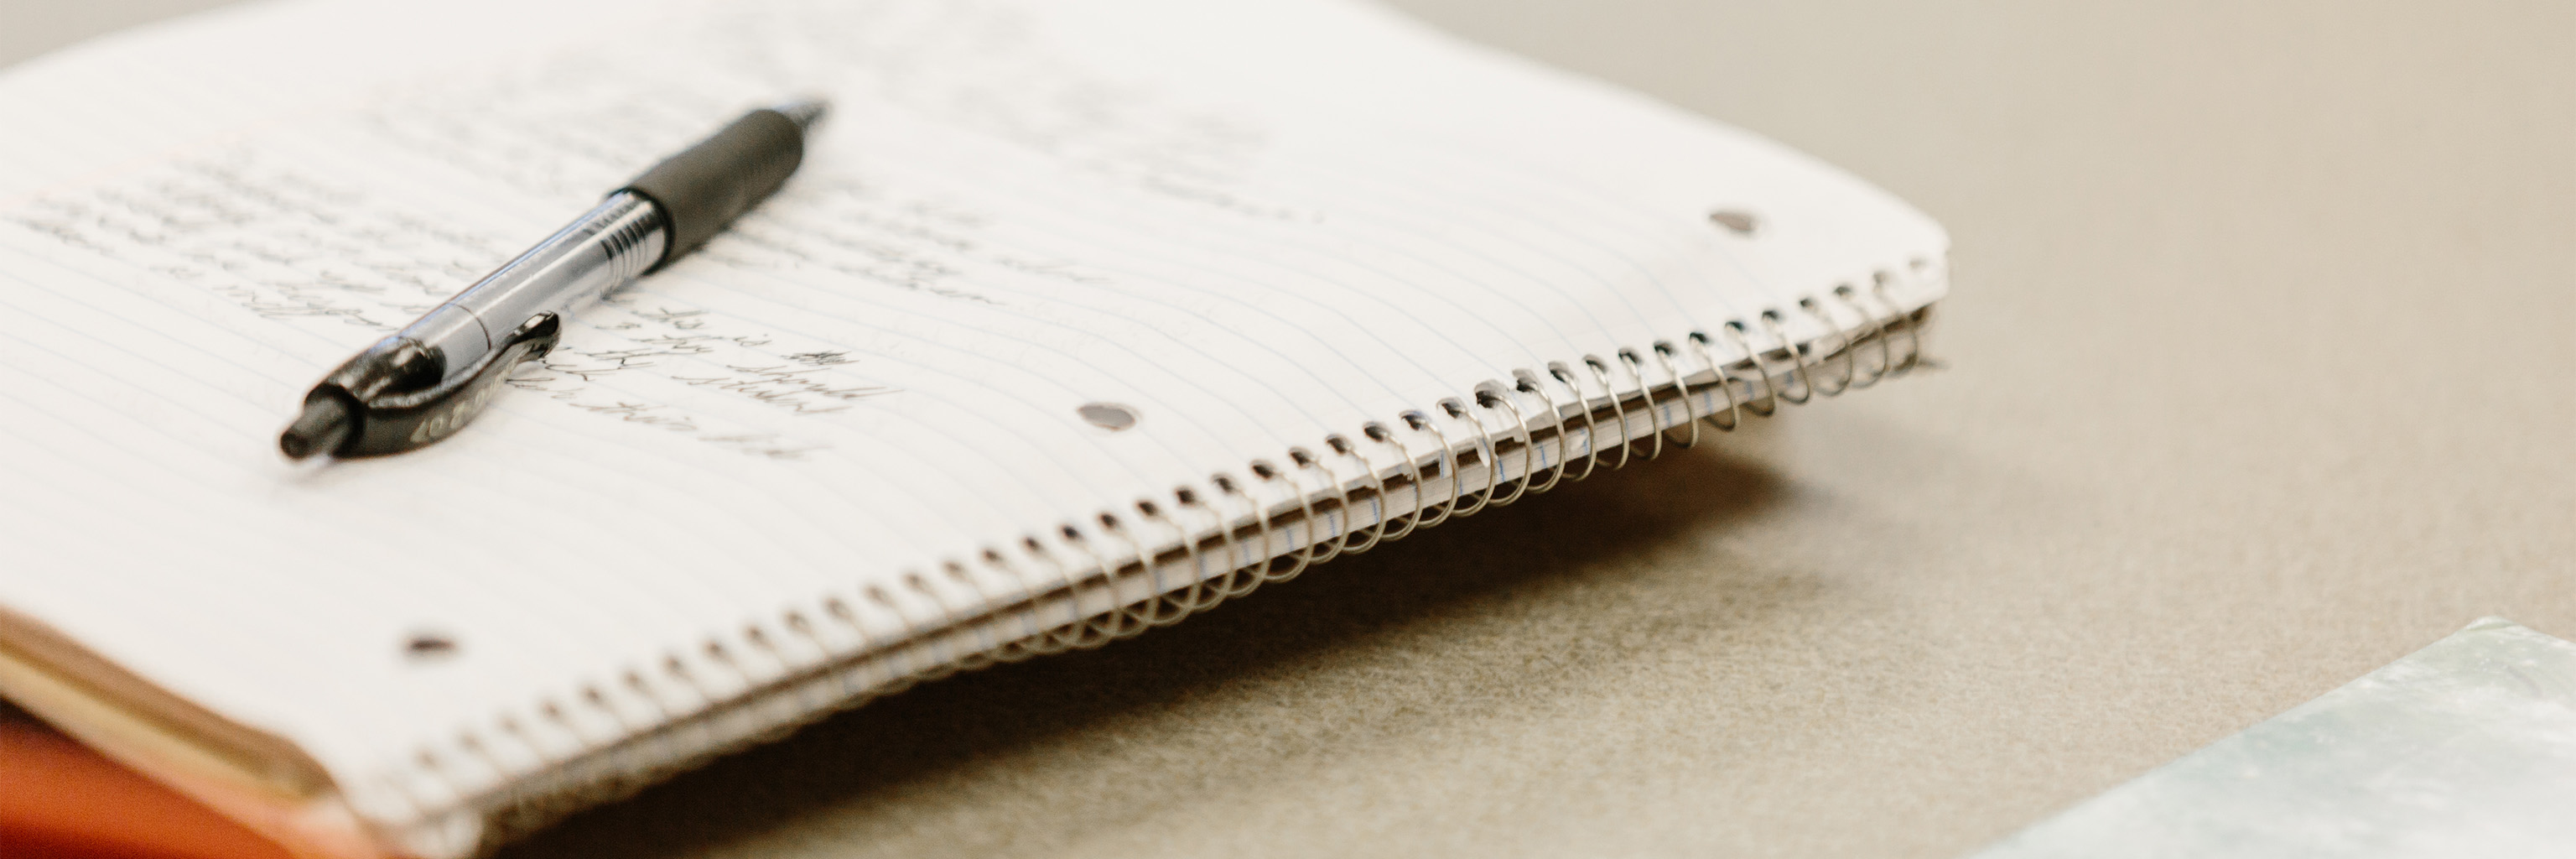 Close-up of a pen sitting on an open notebook.